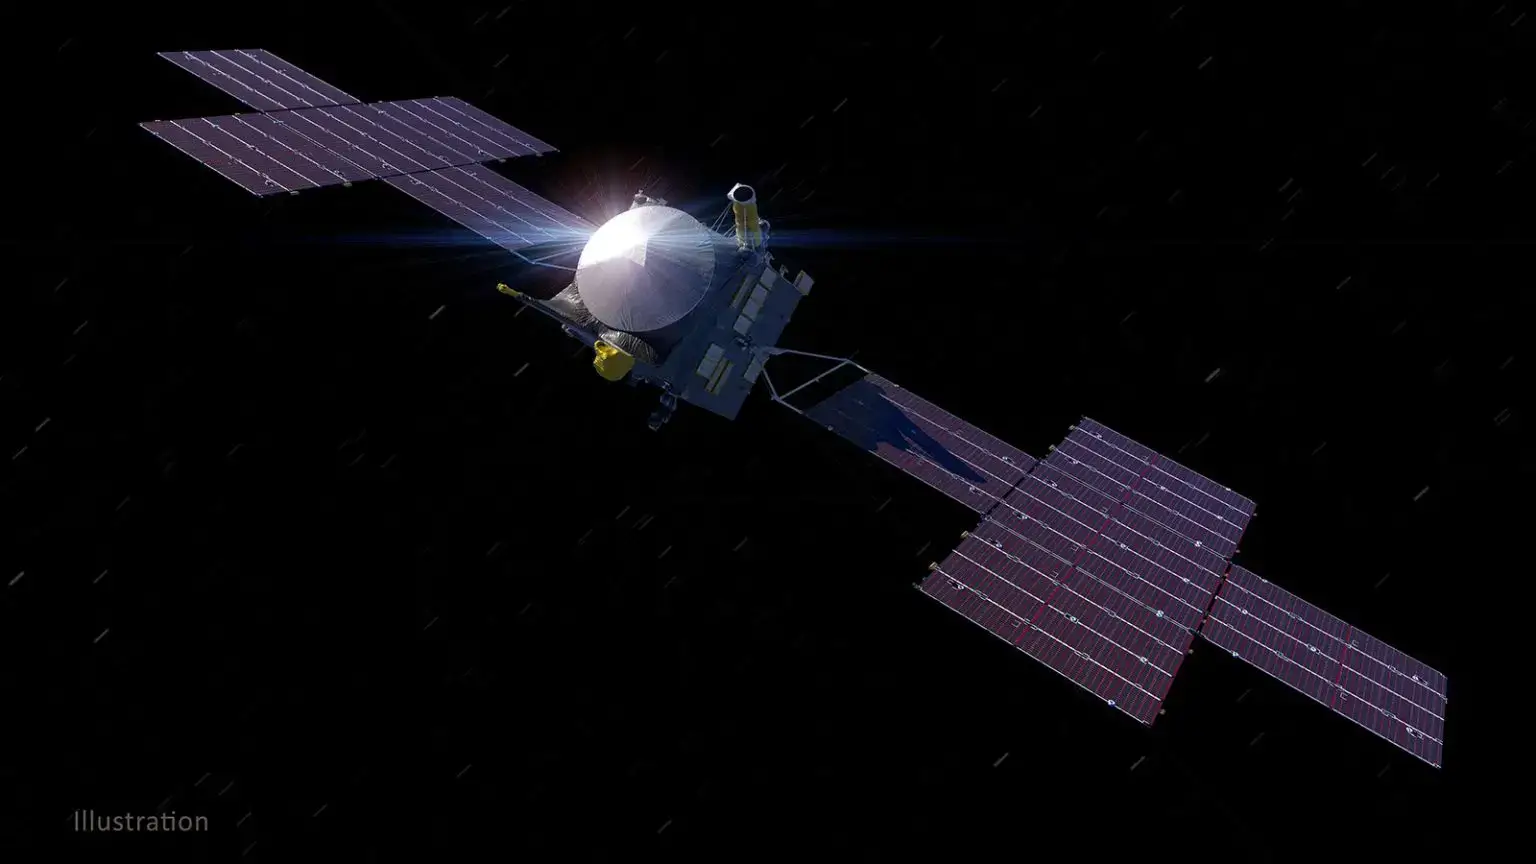 Illustration showing the Psyche spacecraft as it flies towards the Psyche asteroid. Credit: NASA/JPL-Caltech/ASU